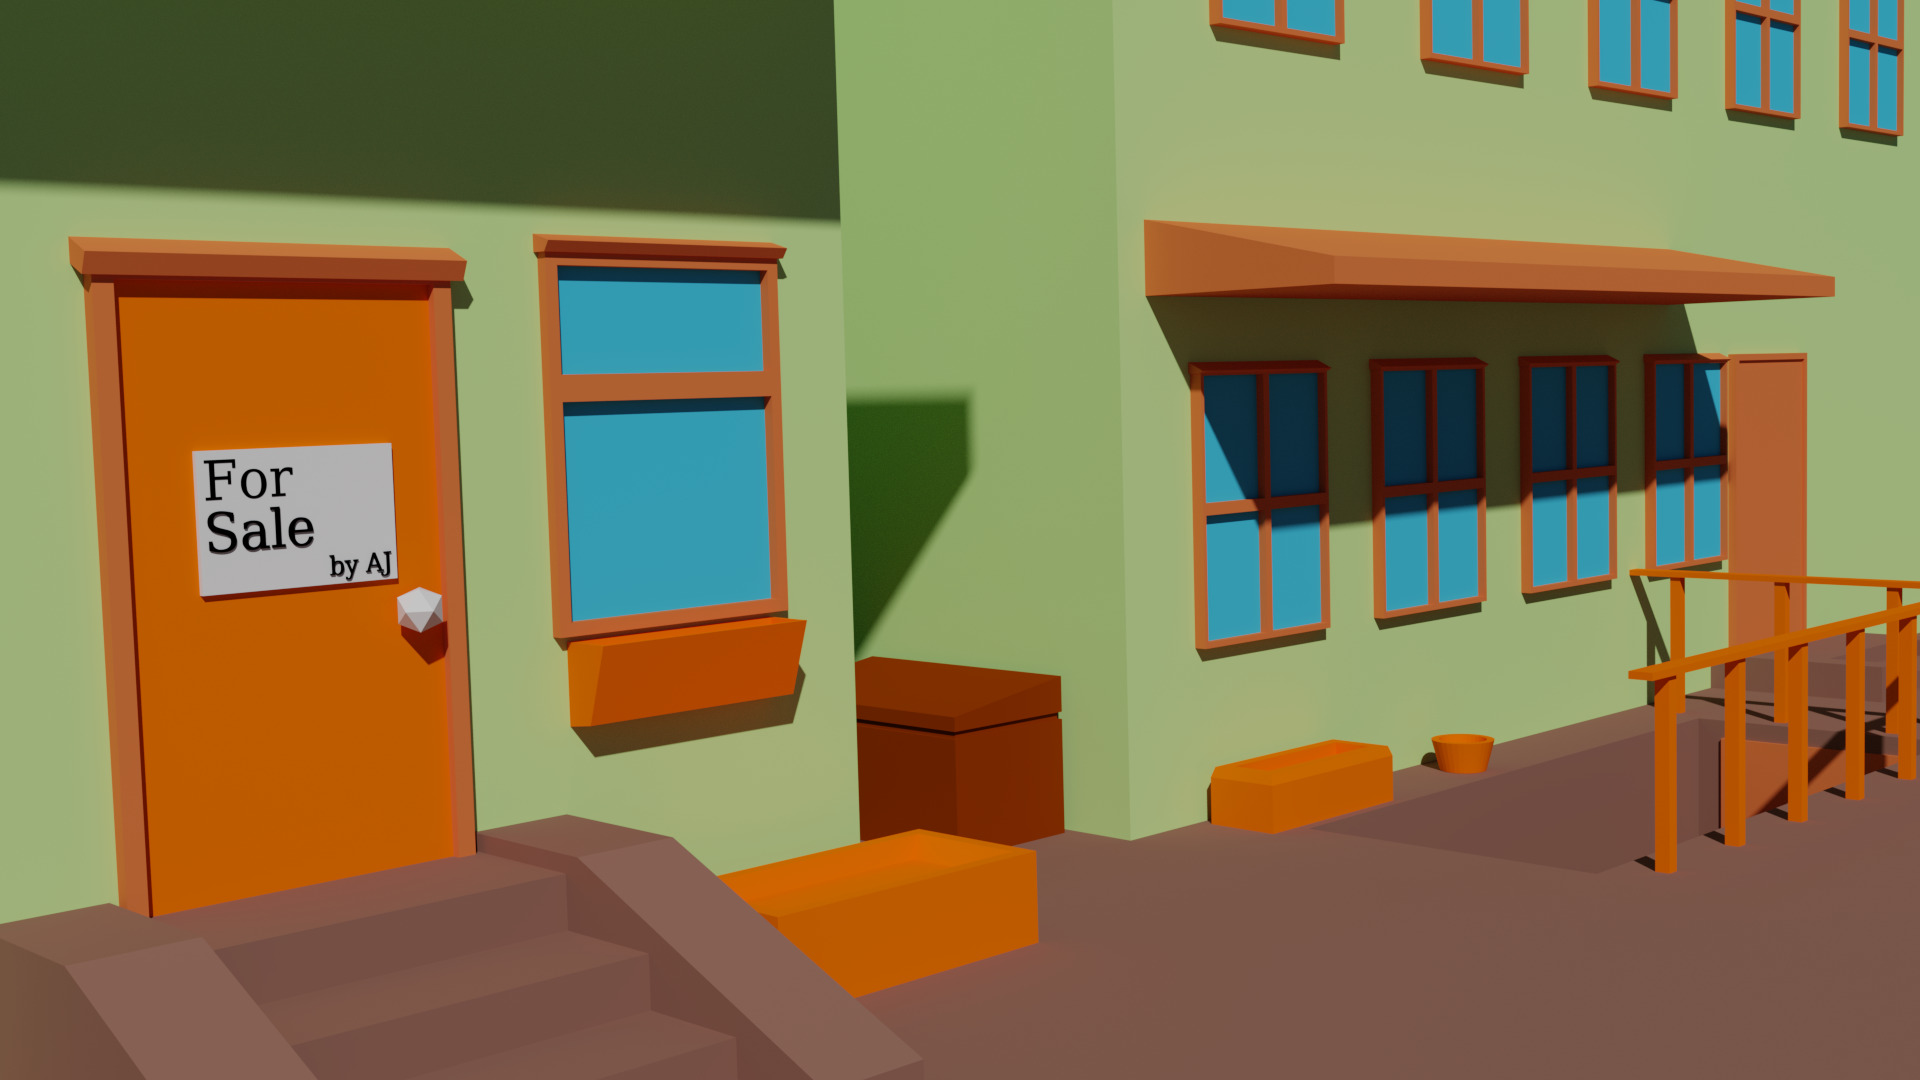 Render of a low poly street